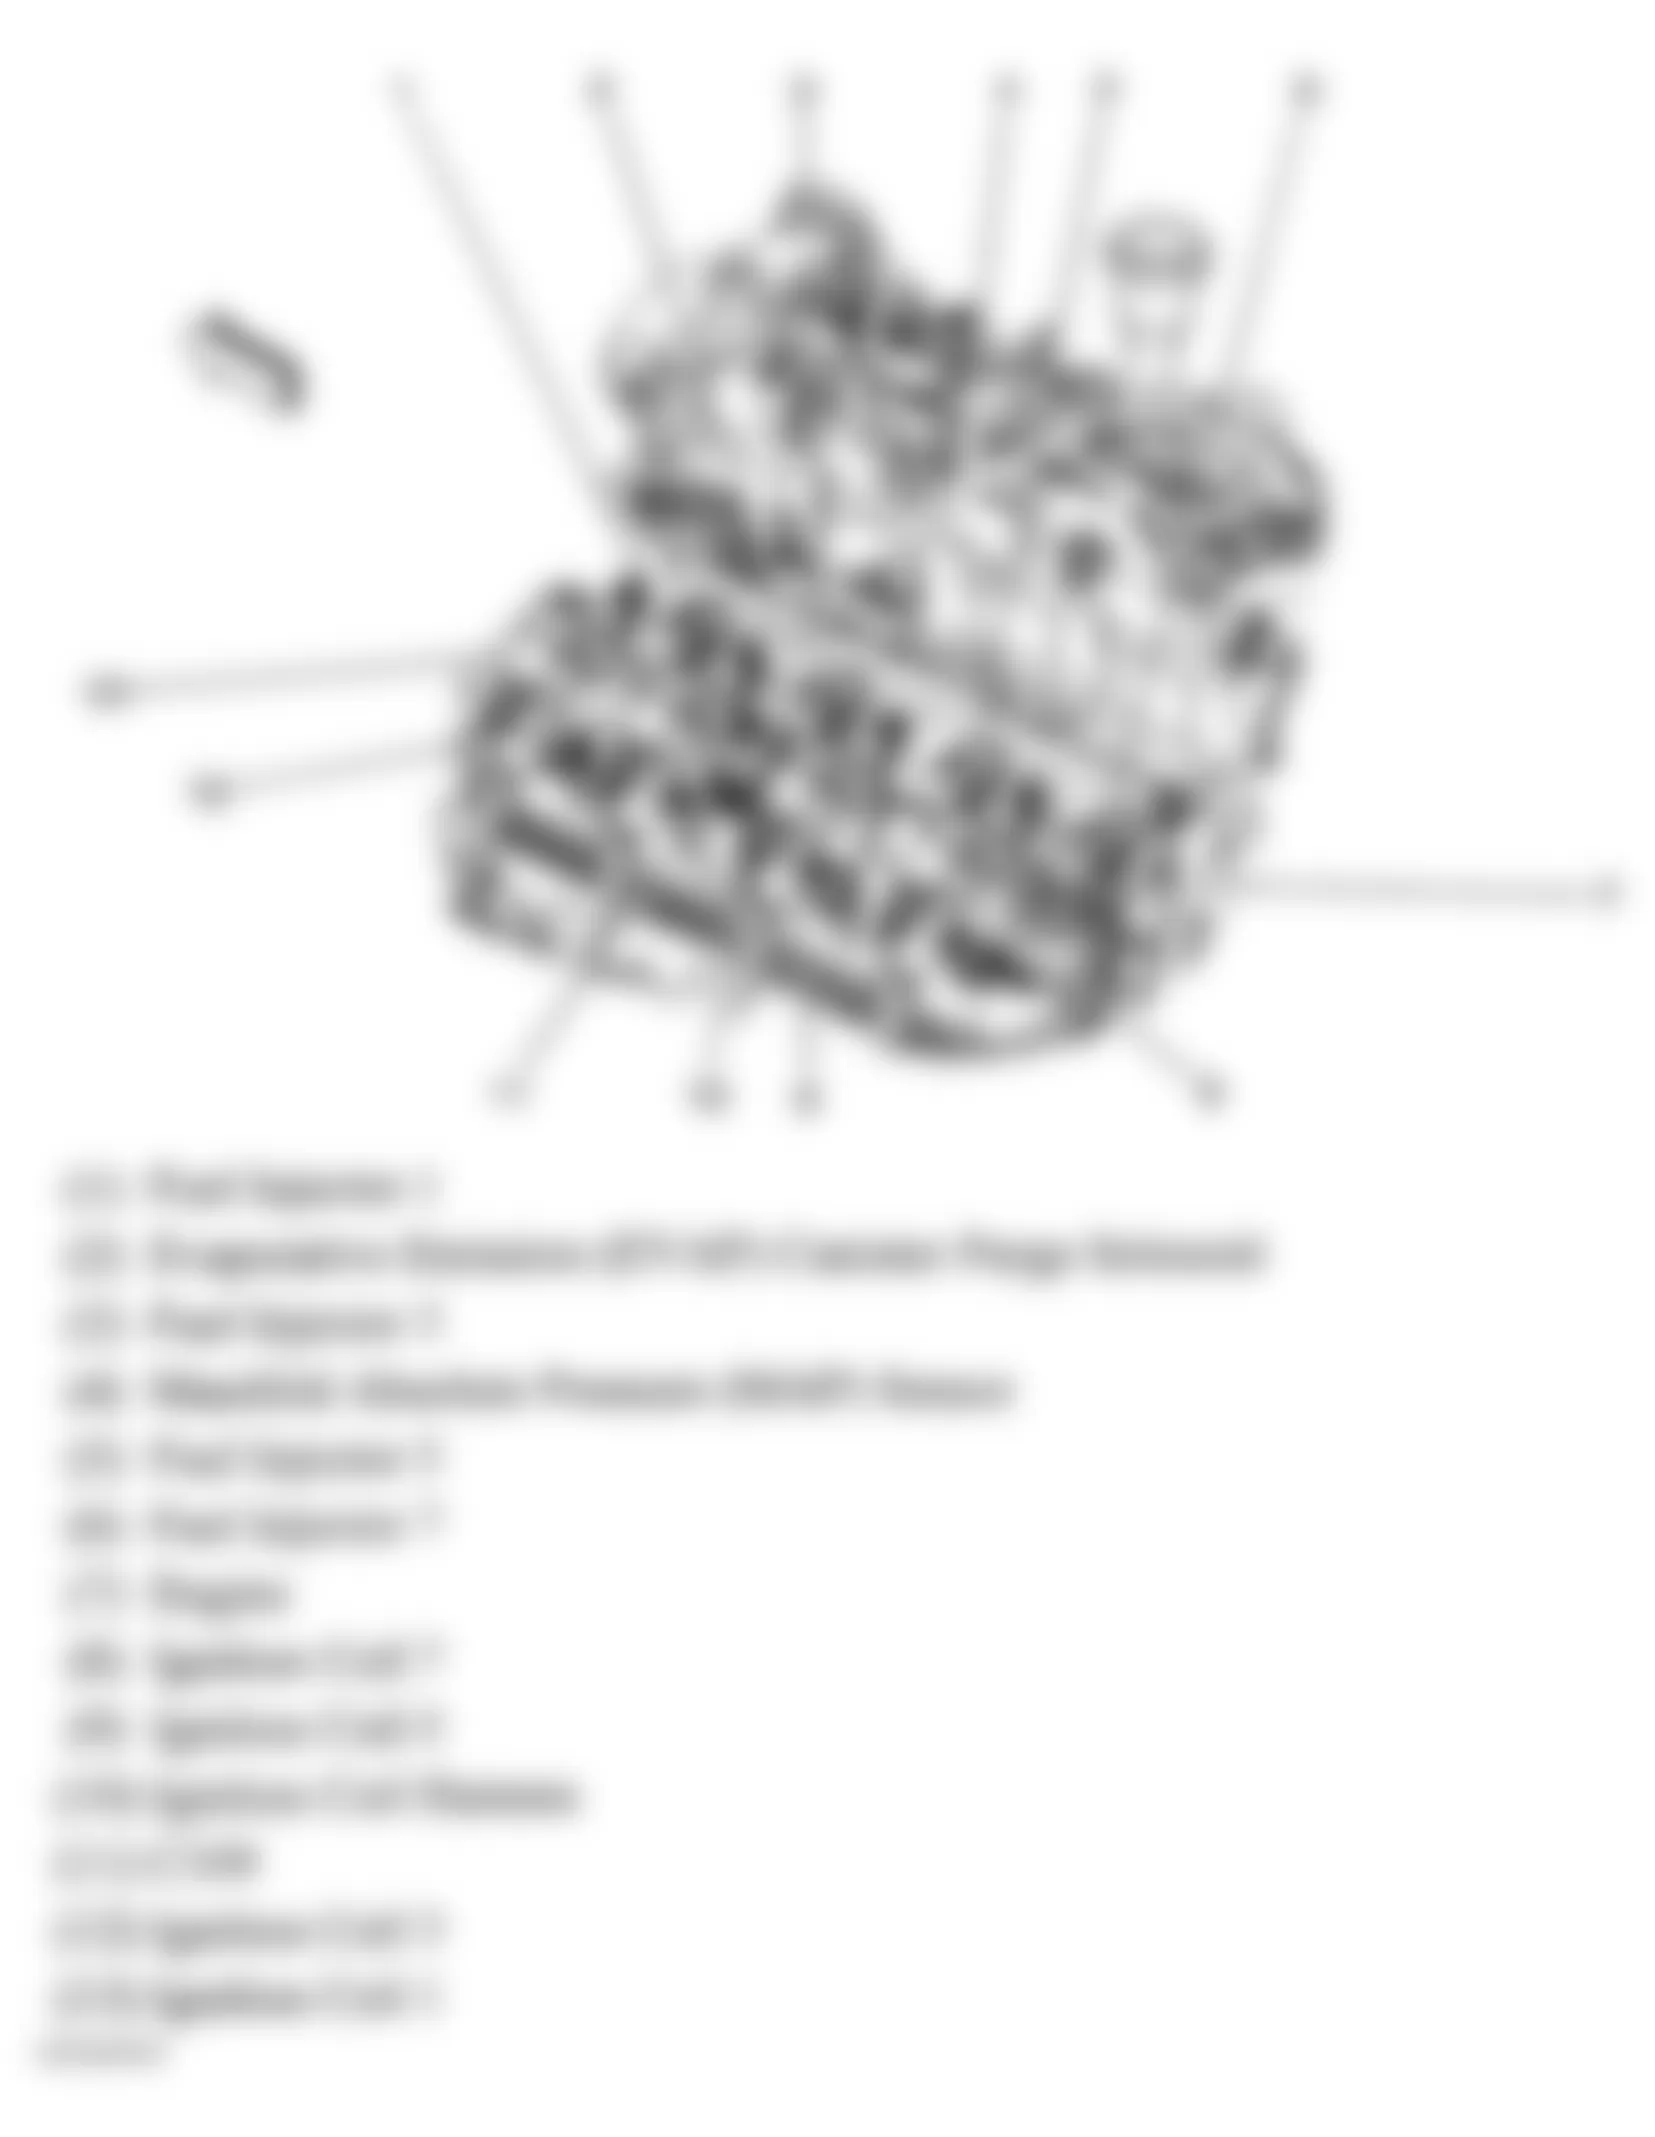 GMC Envoy 2007 - Component Locations -  Upper Left Side Of Engine (5.3L/6.0L)